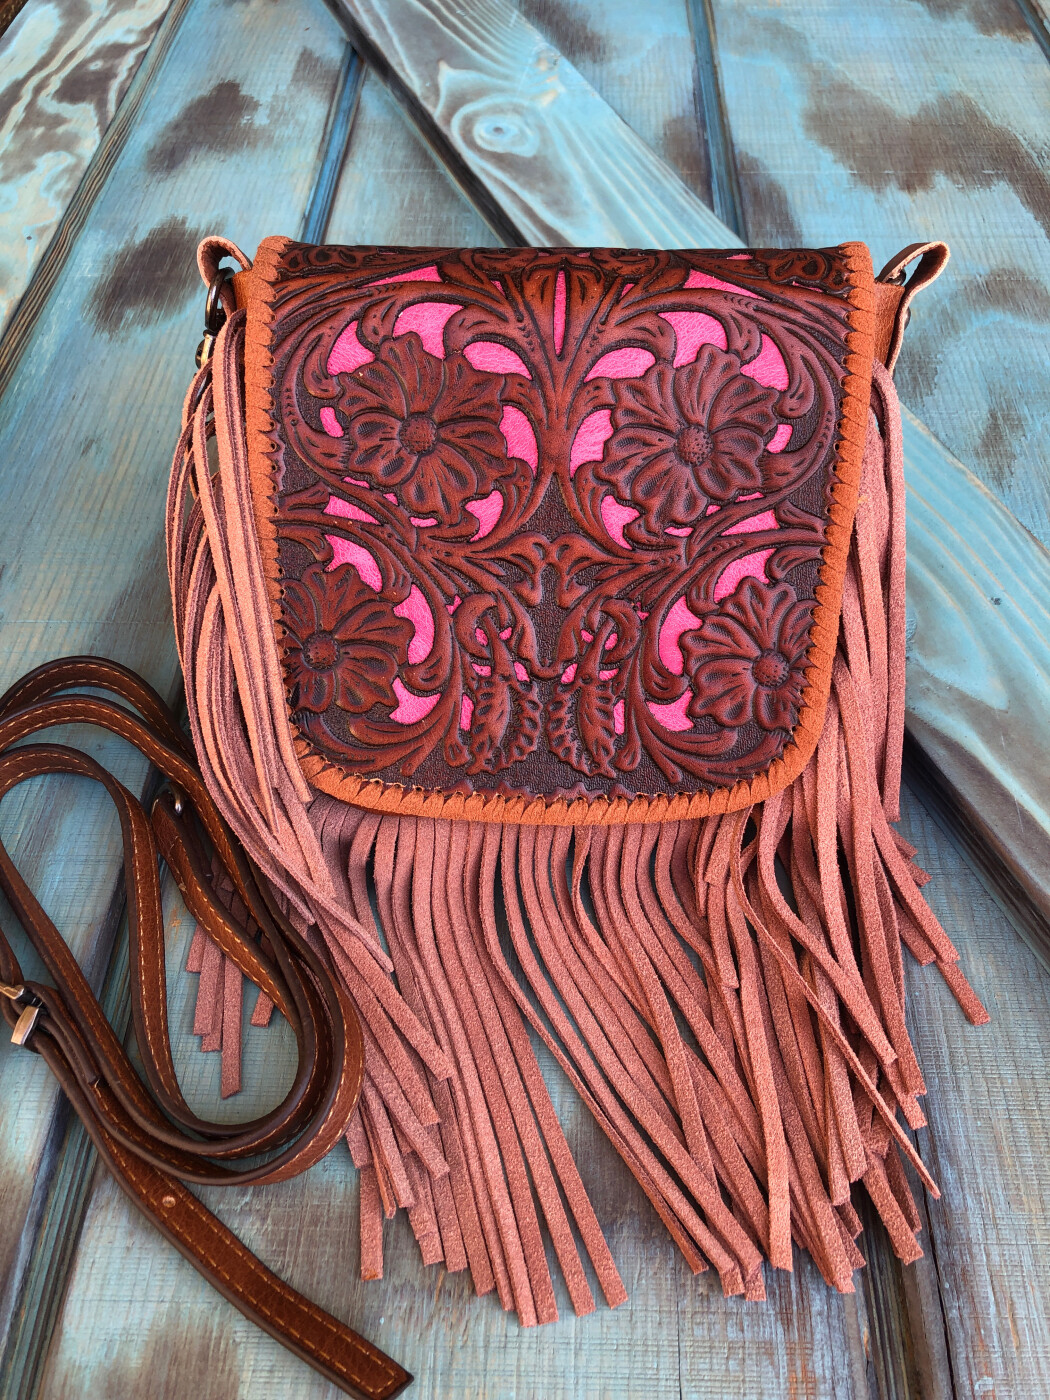 White Fringe Bohemian Tooled Leather Messenger Crossbody Bag Purse   Montana West, American Bling, Trinity Ranch Western Purses & Bags